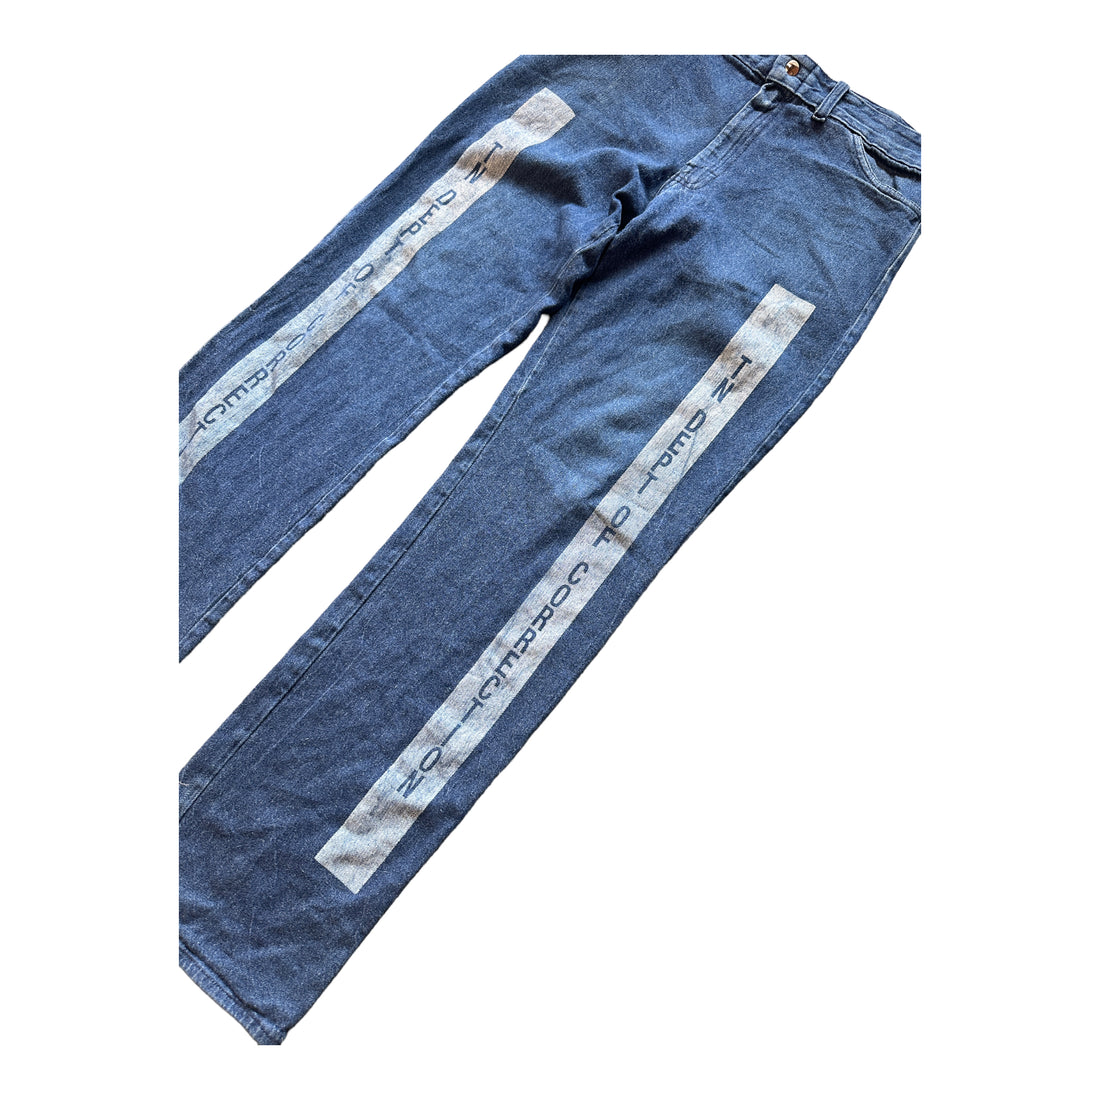 TENNESSEE DEPARTMENT OF CORRECTIONS STRAIGHT LEG BLUE JEANS DENIM ‘36X36’ - 2000S